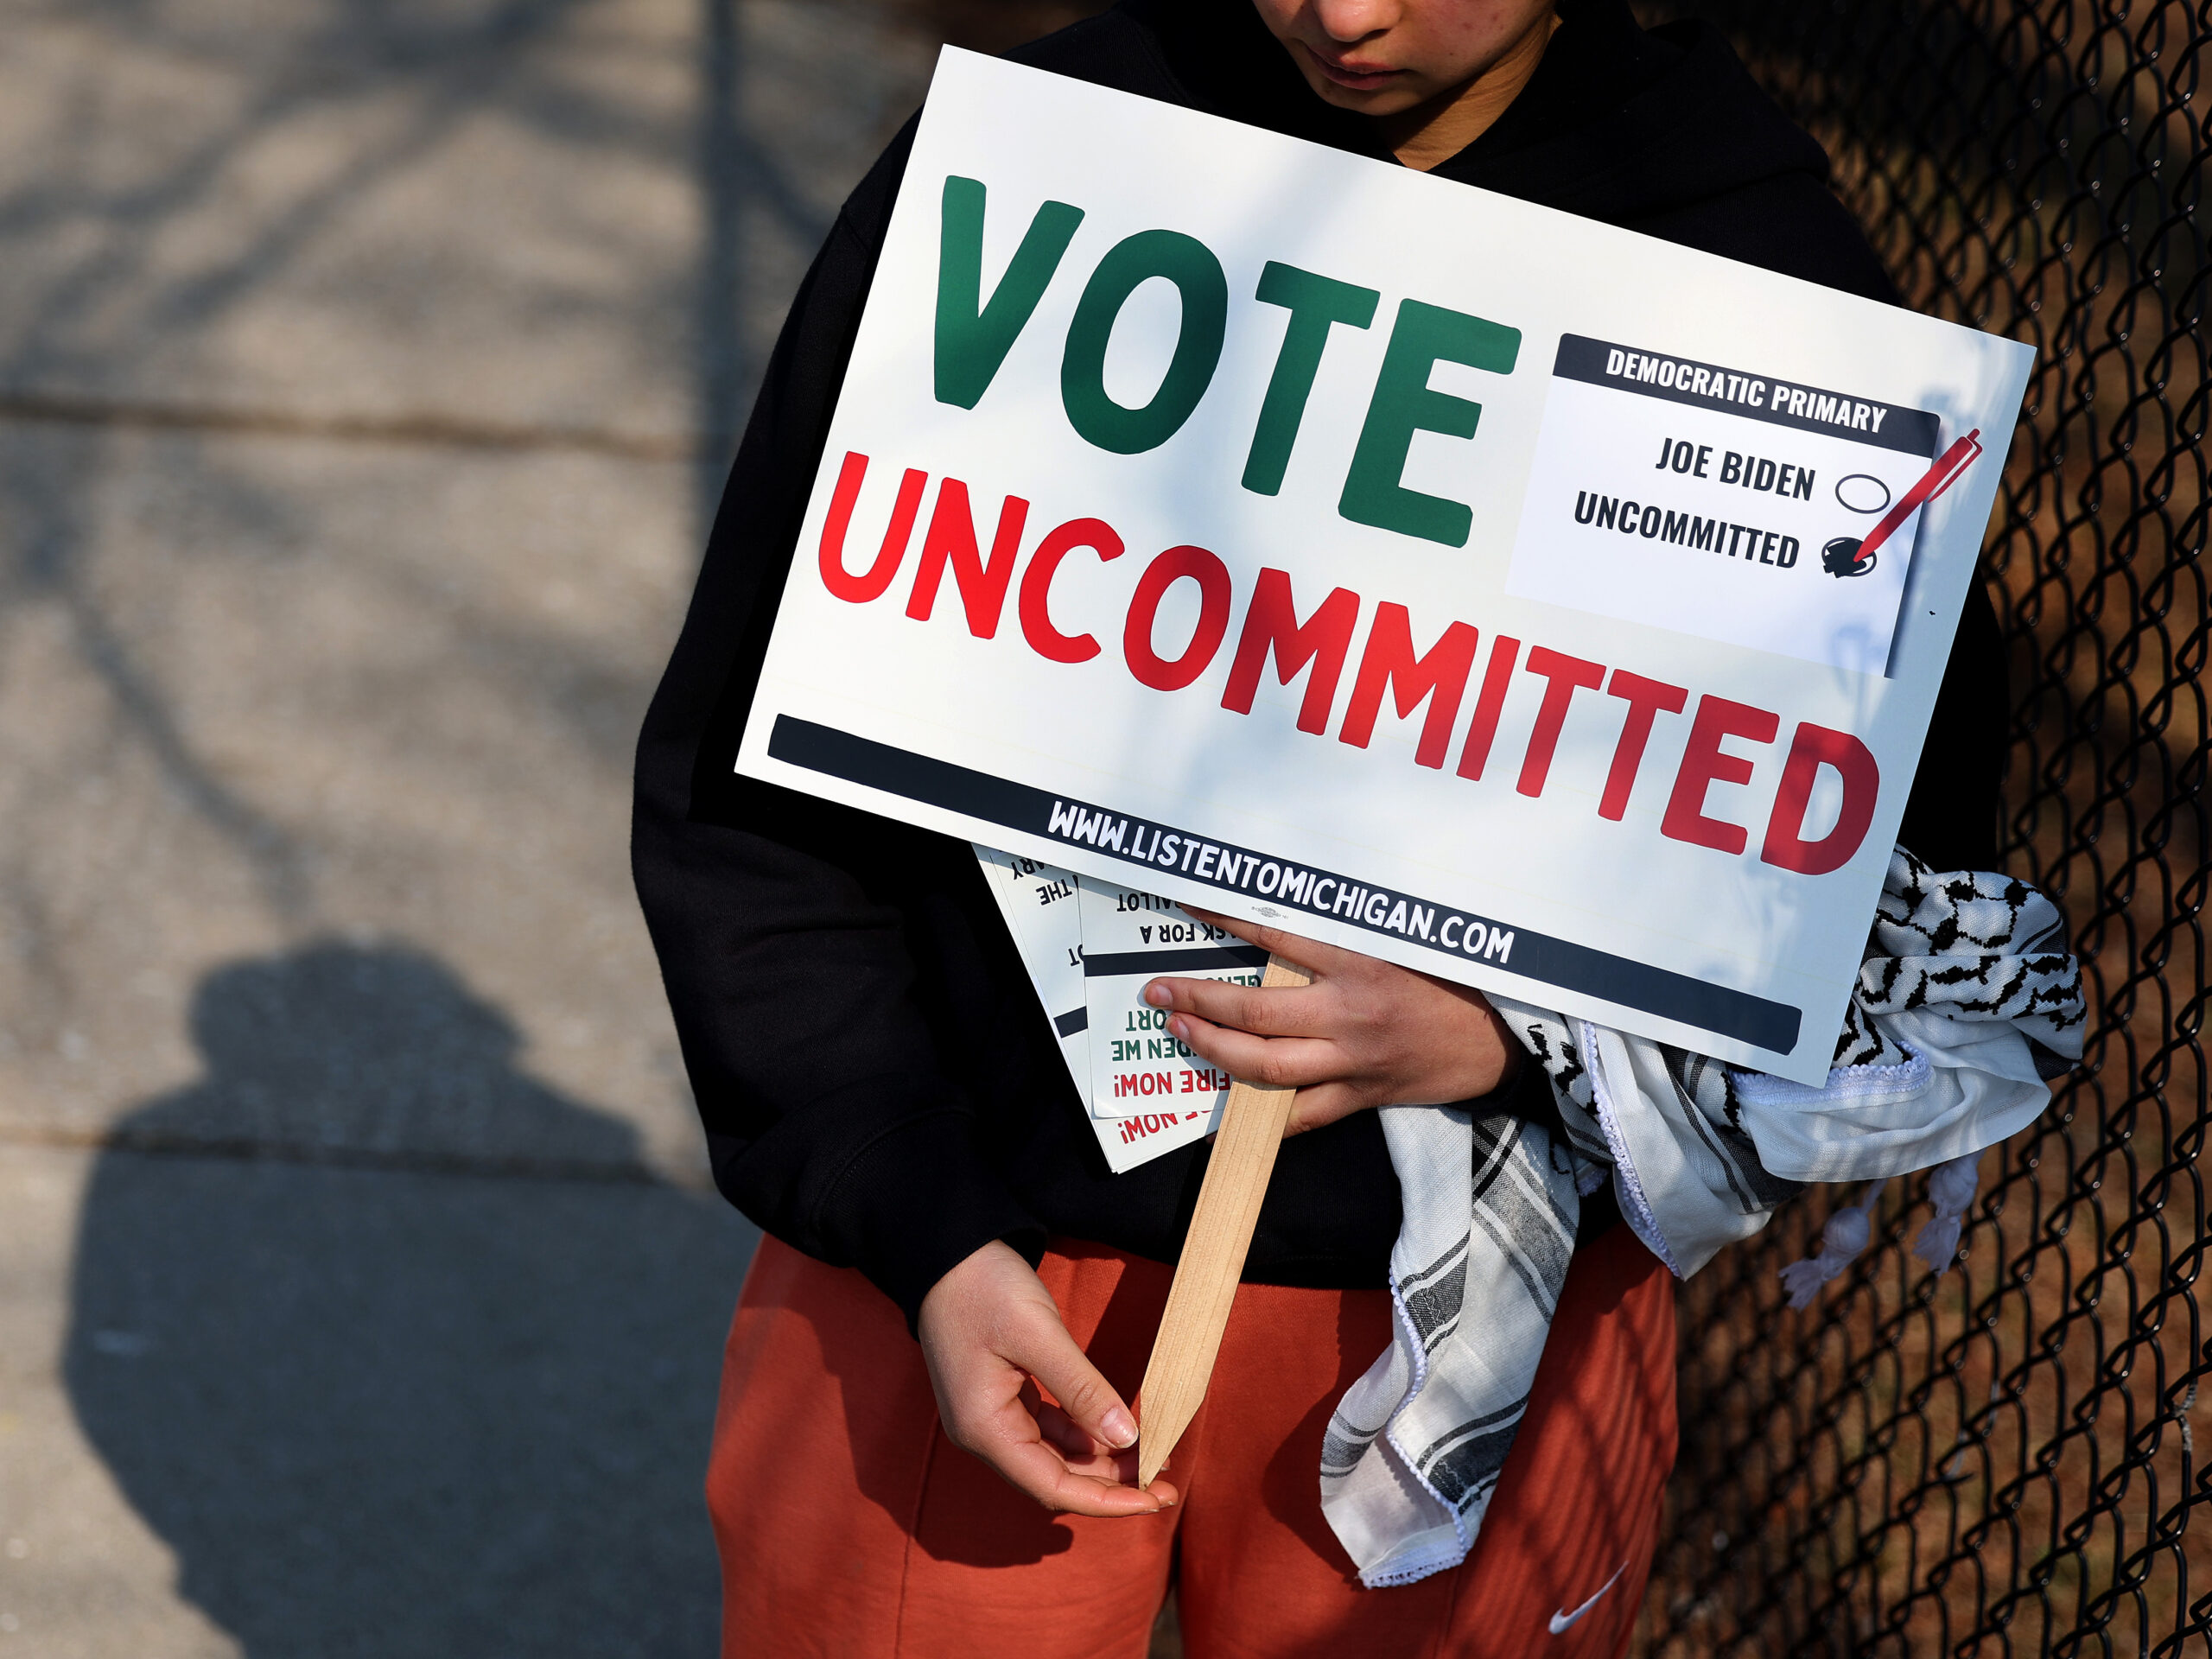 The push to vote ‘uncommitted’ to Biden in Michigan exceeds goal